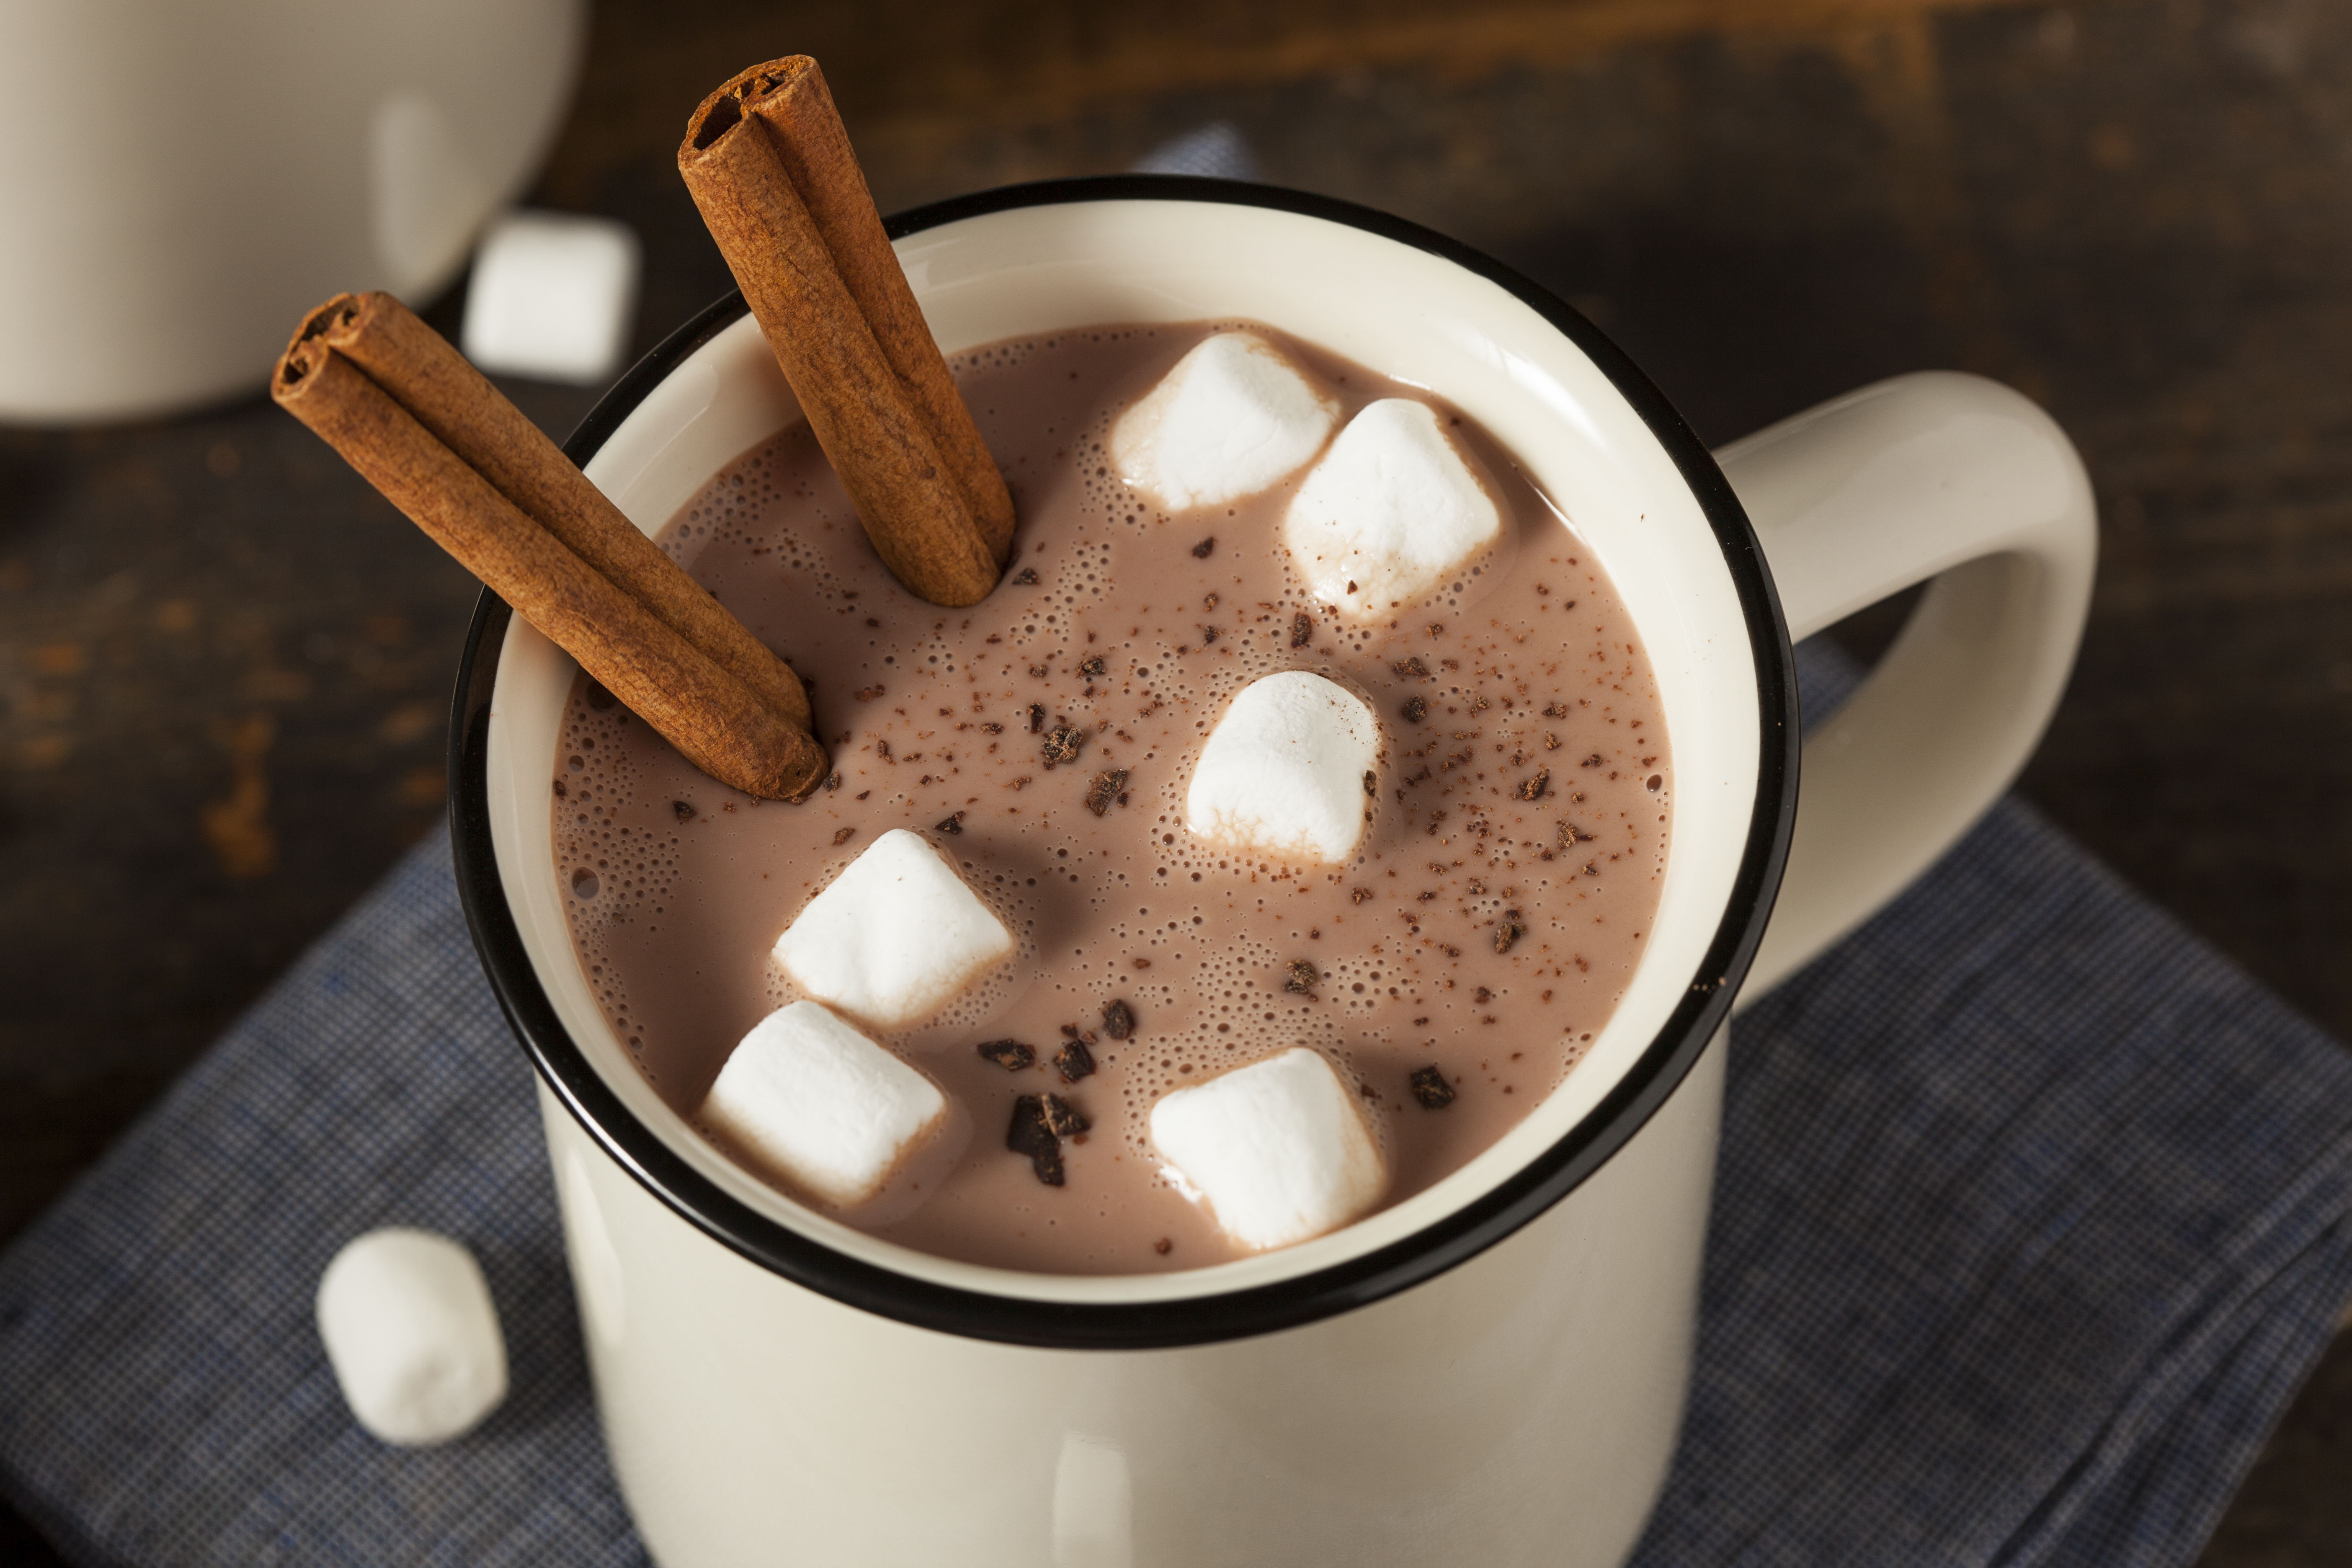 Search results for "Hot Chocolate". images, photos, Yandex images...